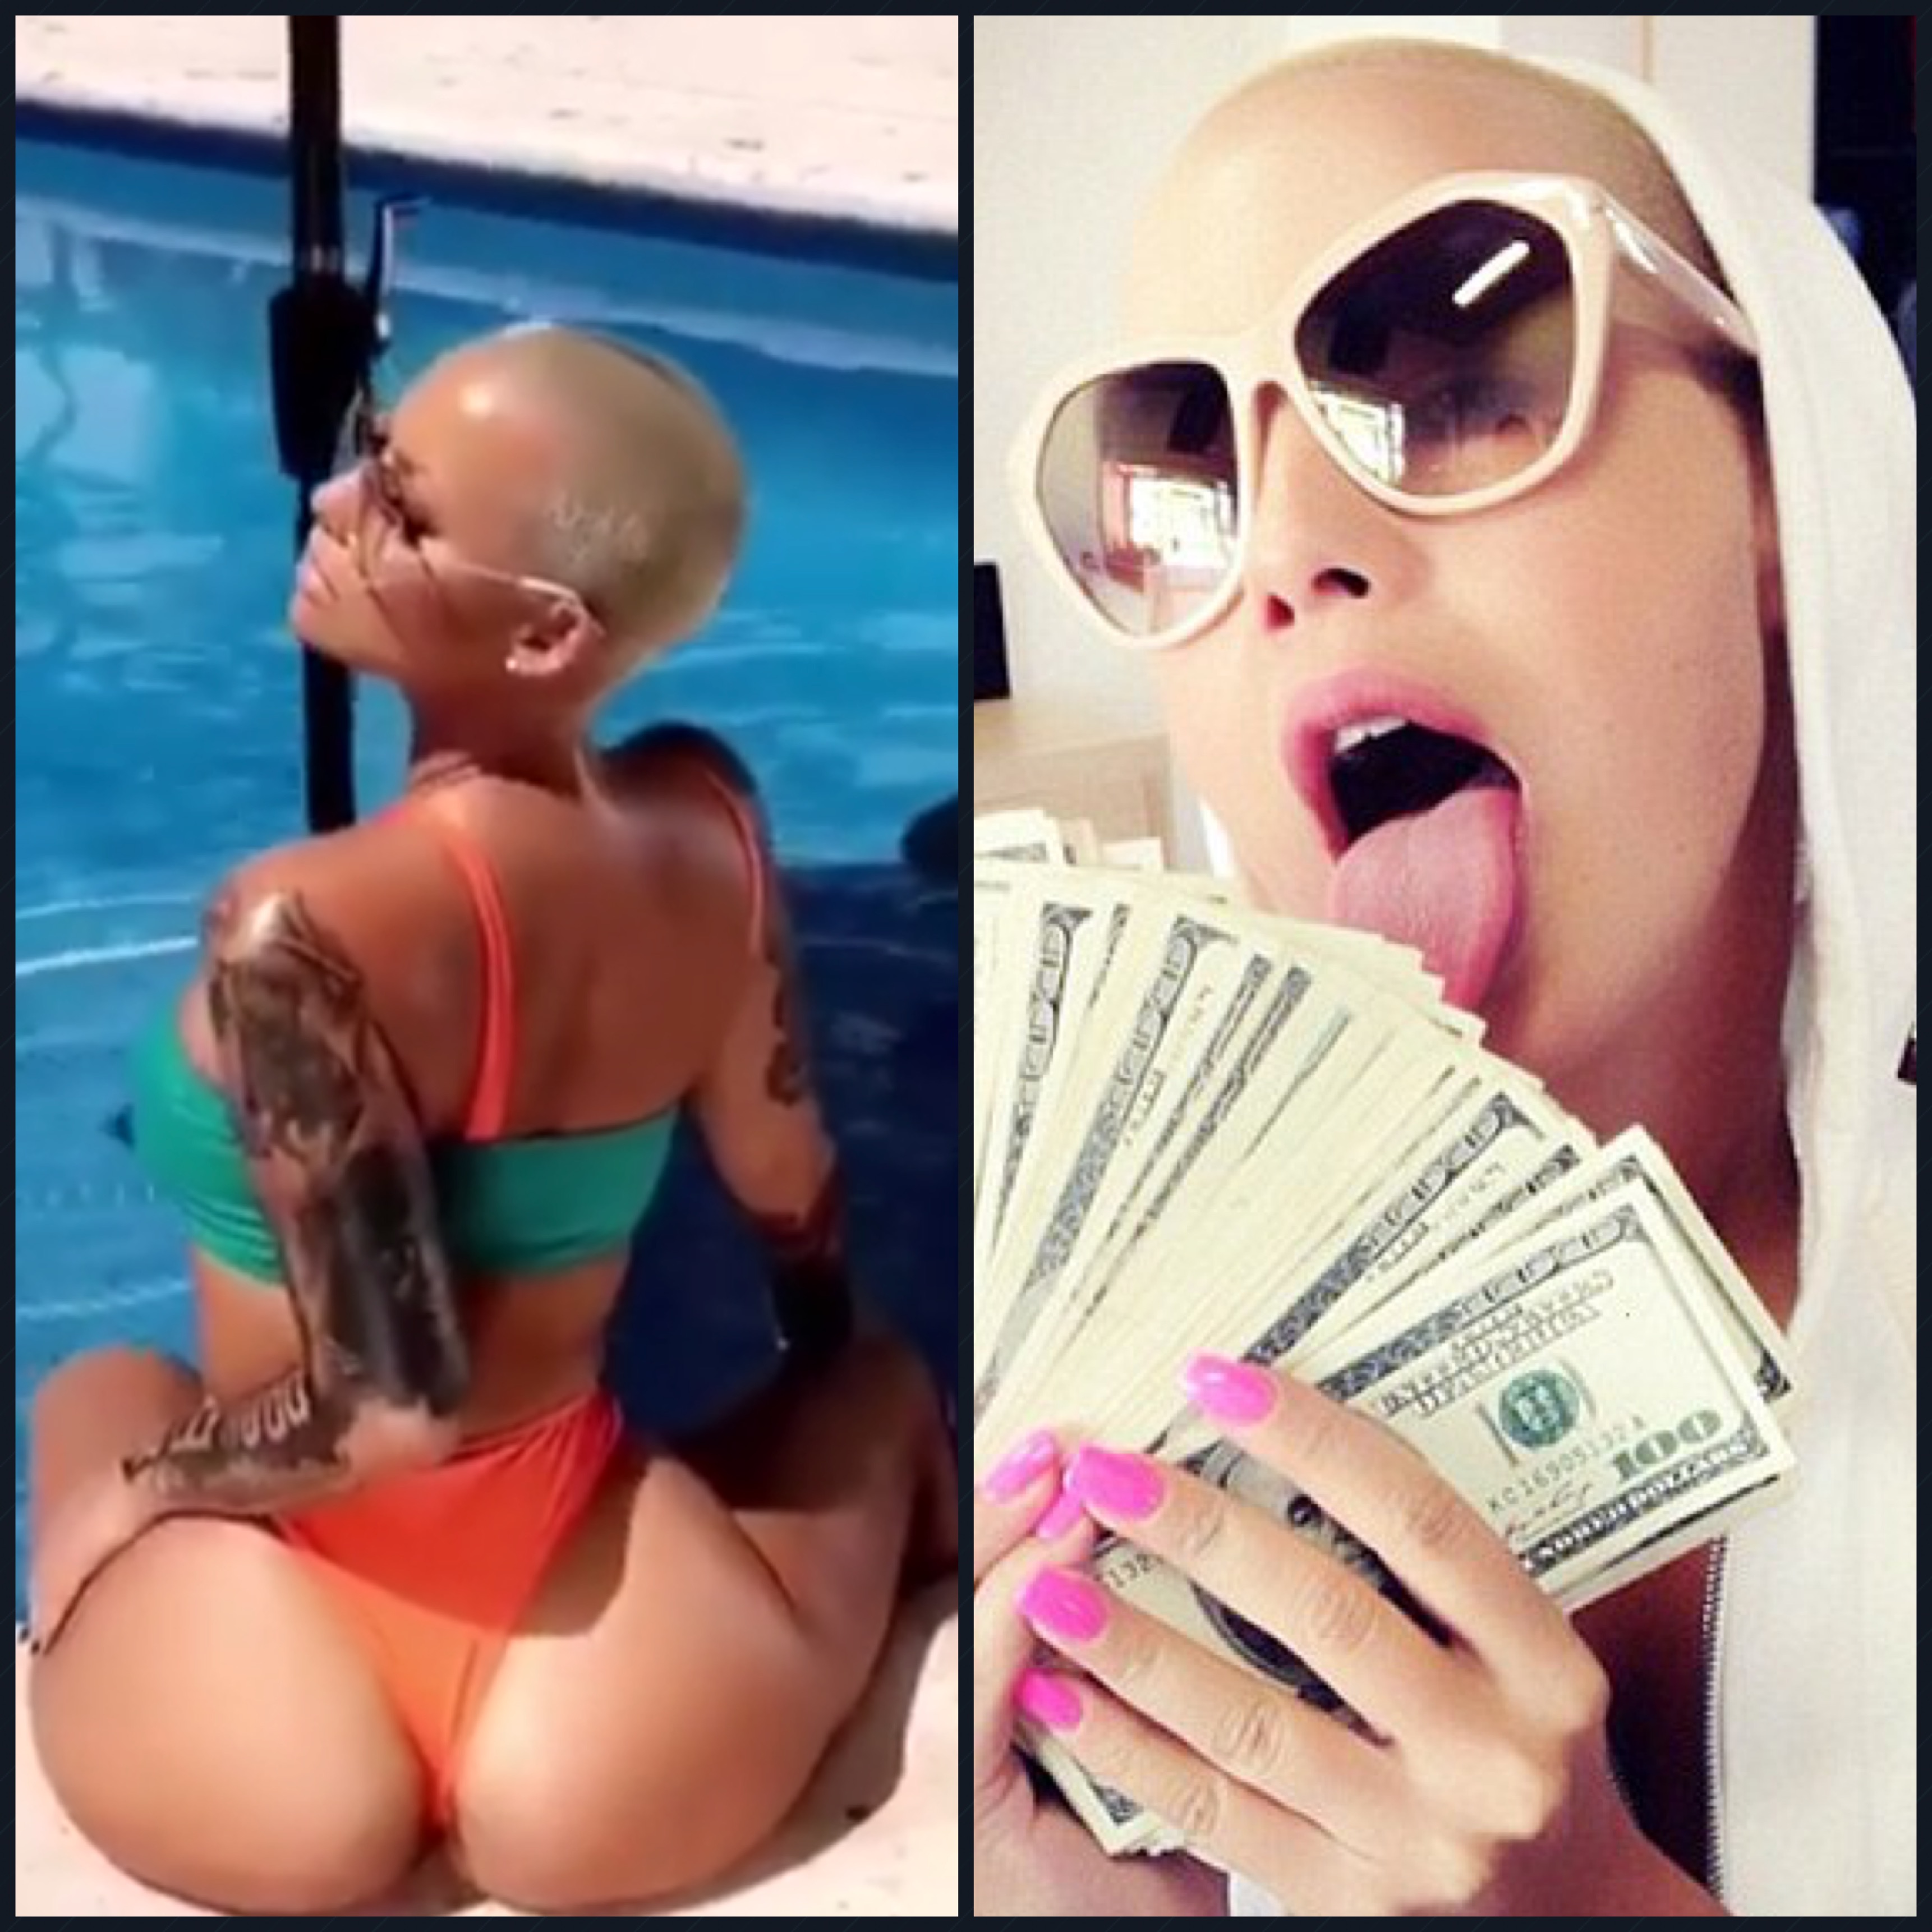 arm marquez recommends amber rose stripping video pic